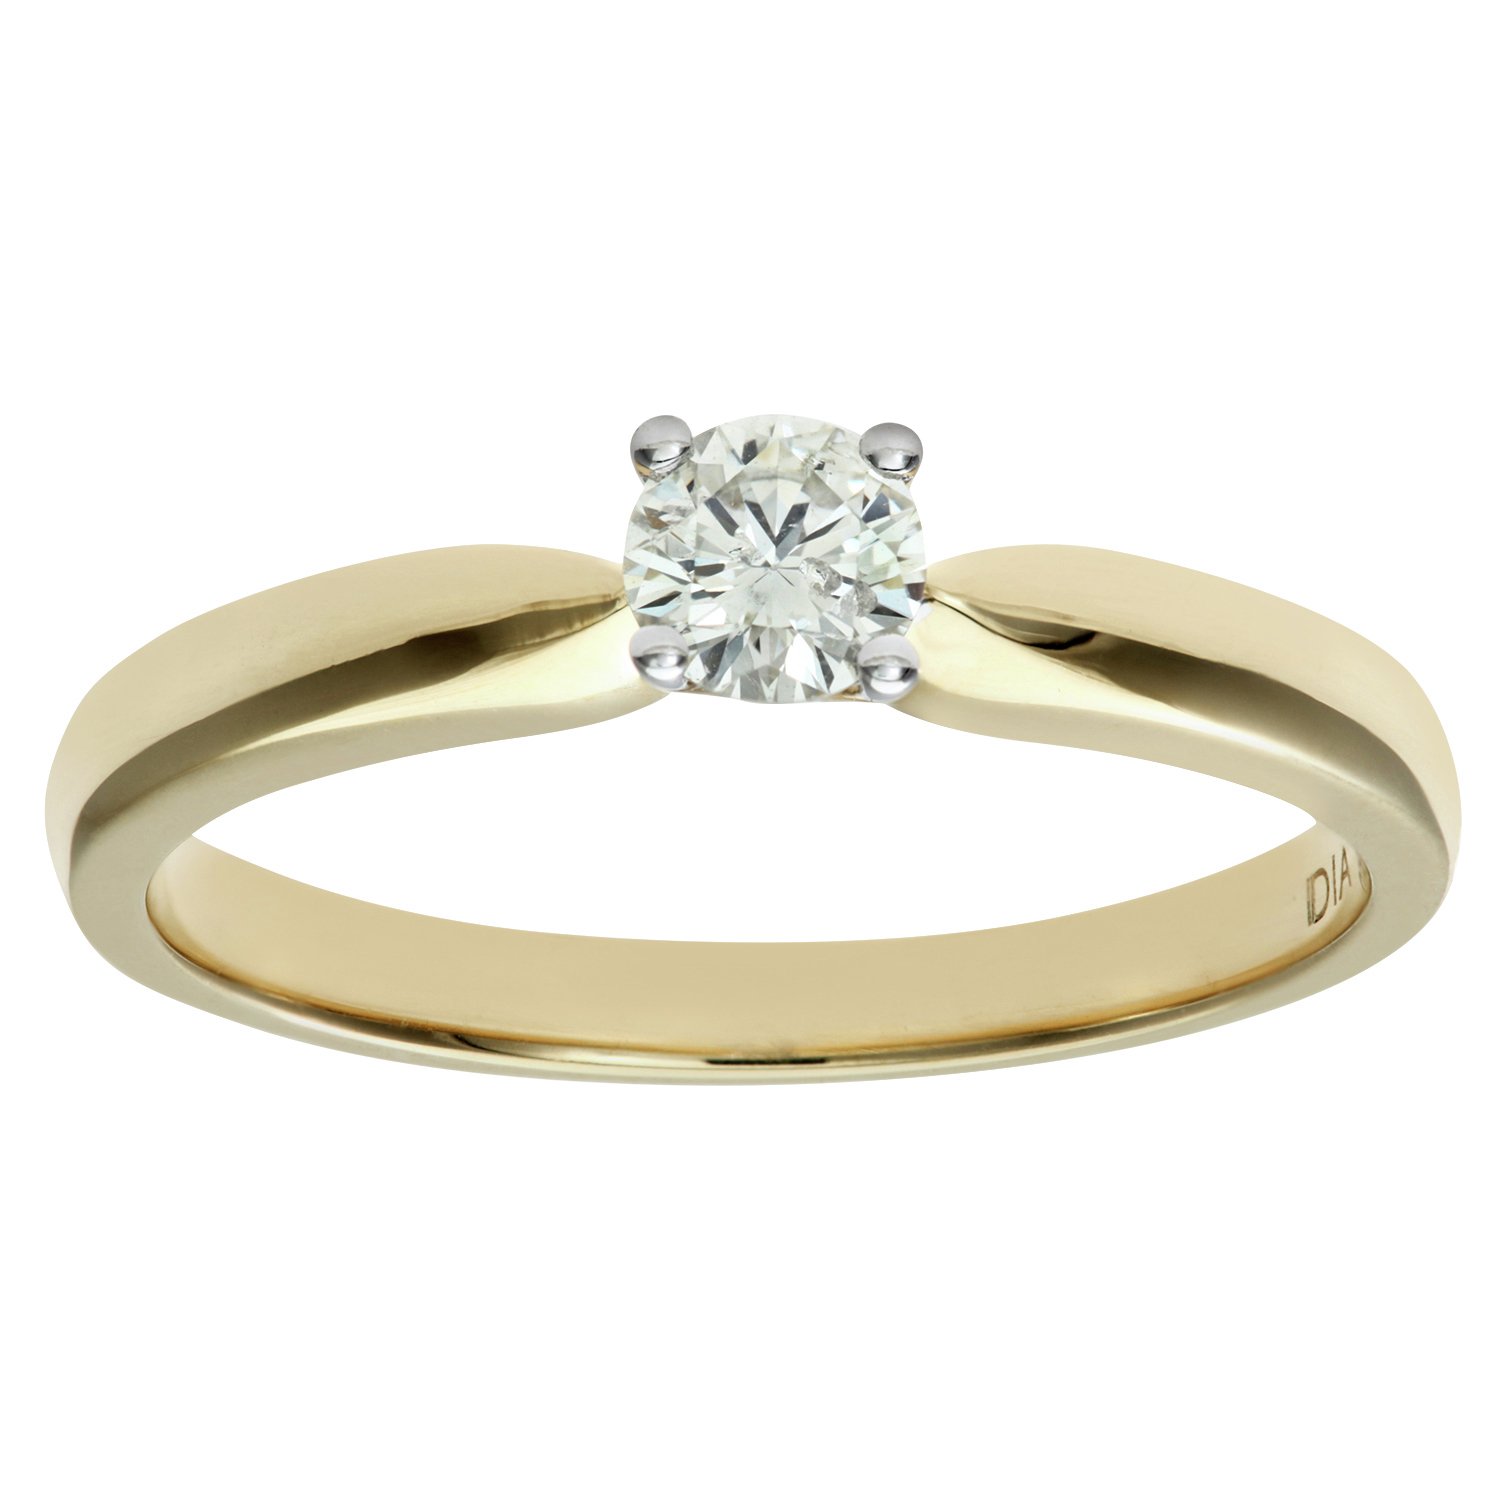 Everlasting Love 18ct Gold 0.25ct Solitaire Ring - Size O